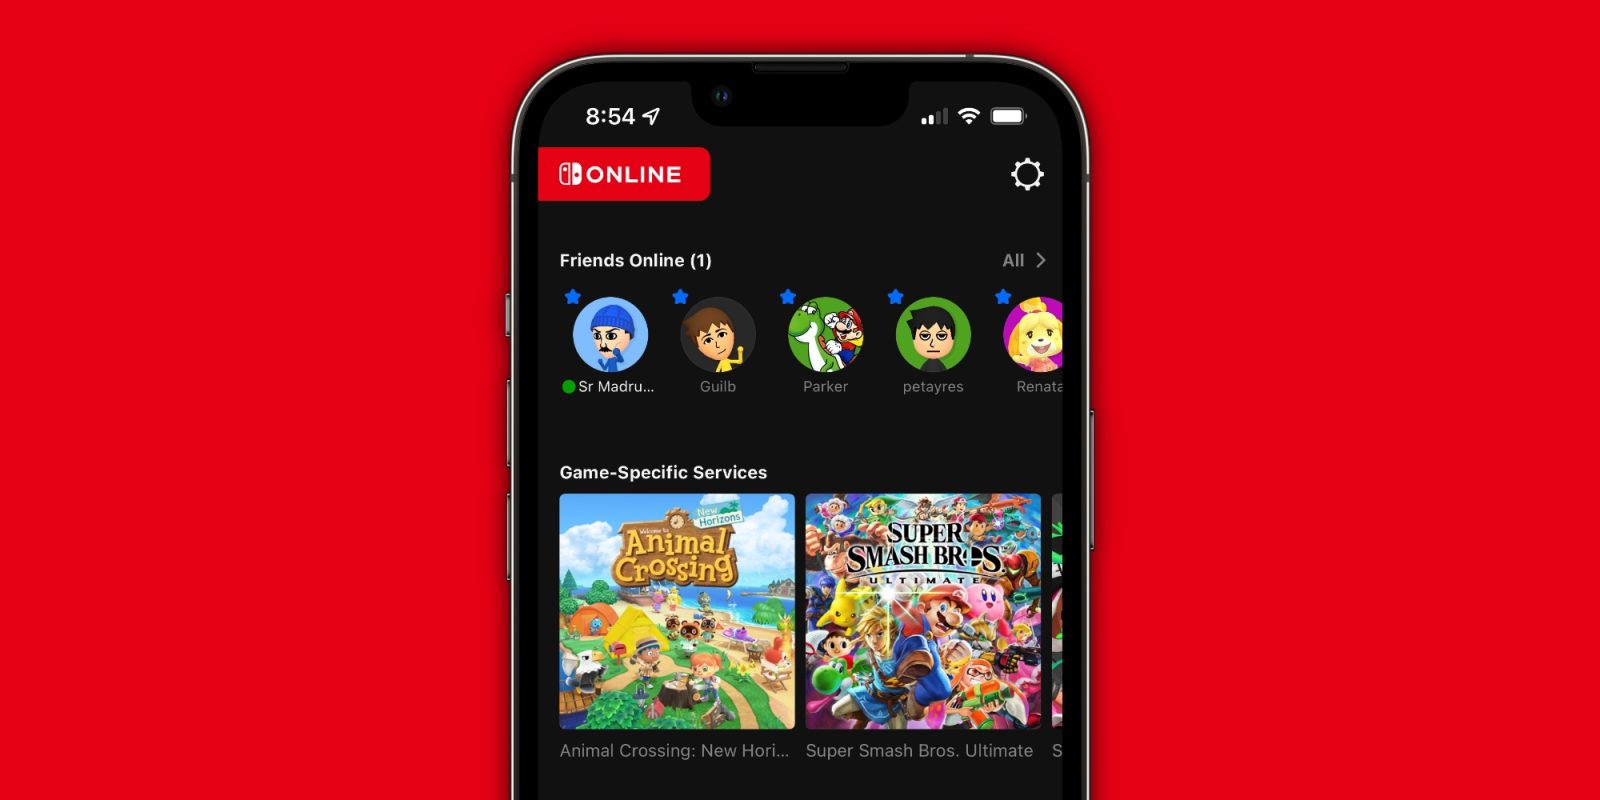 kaos input invadere Nintendo Switch Online for iOS updated with redesign, friends availability,  more - 9to5Mac